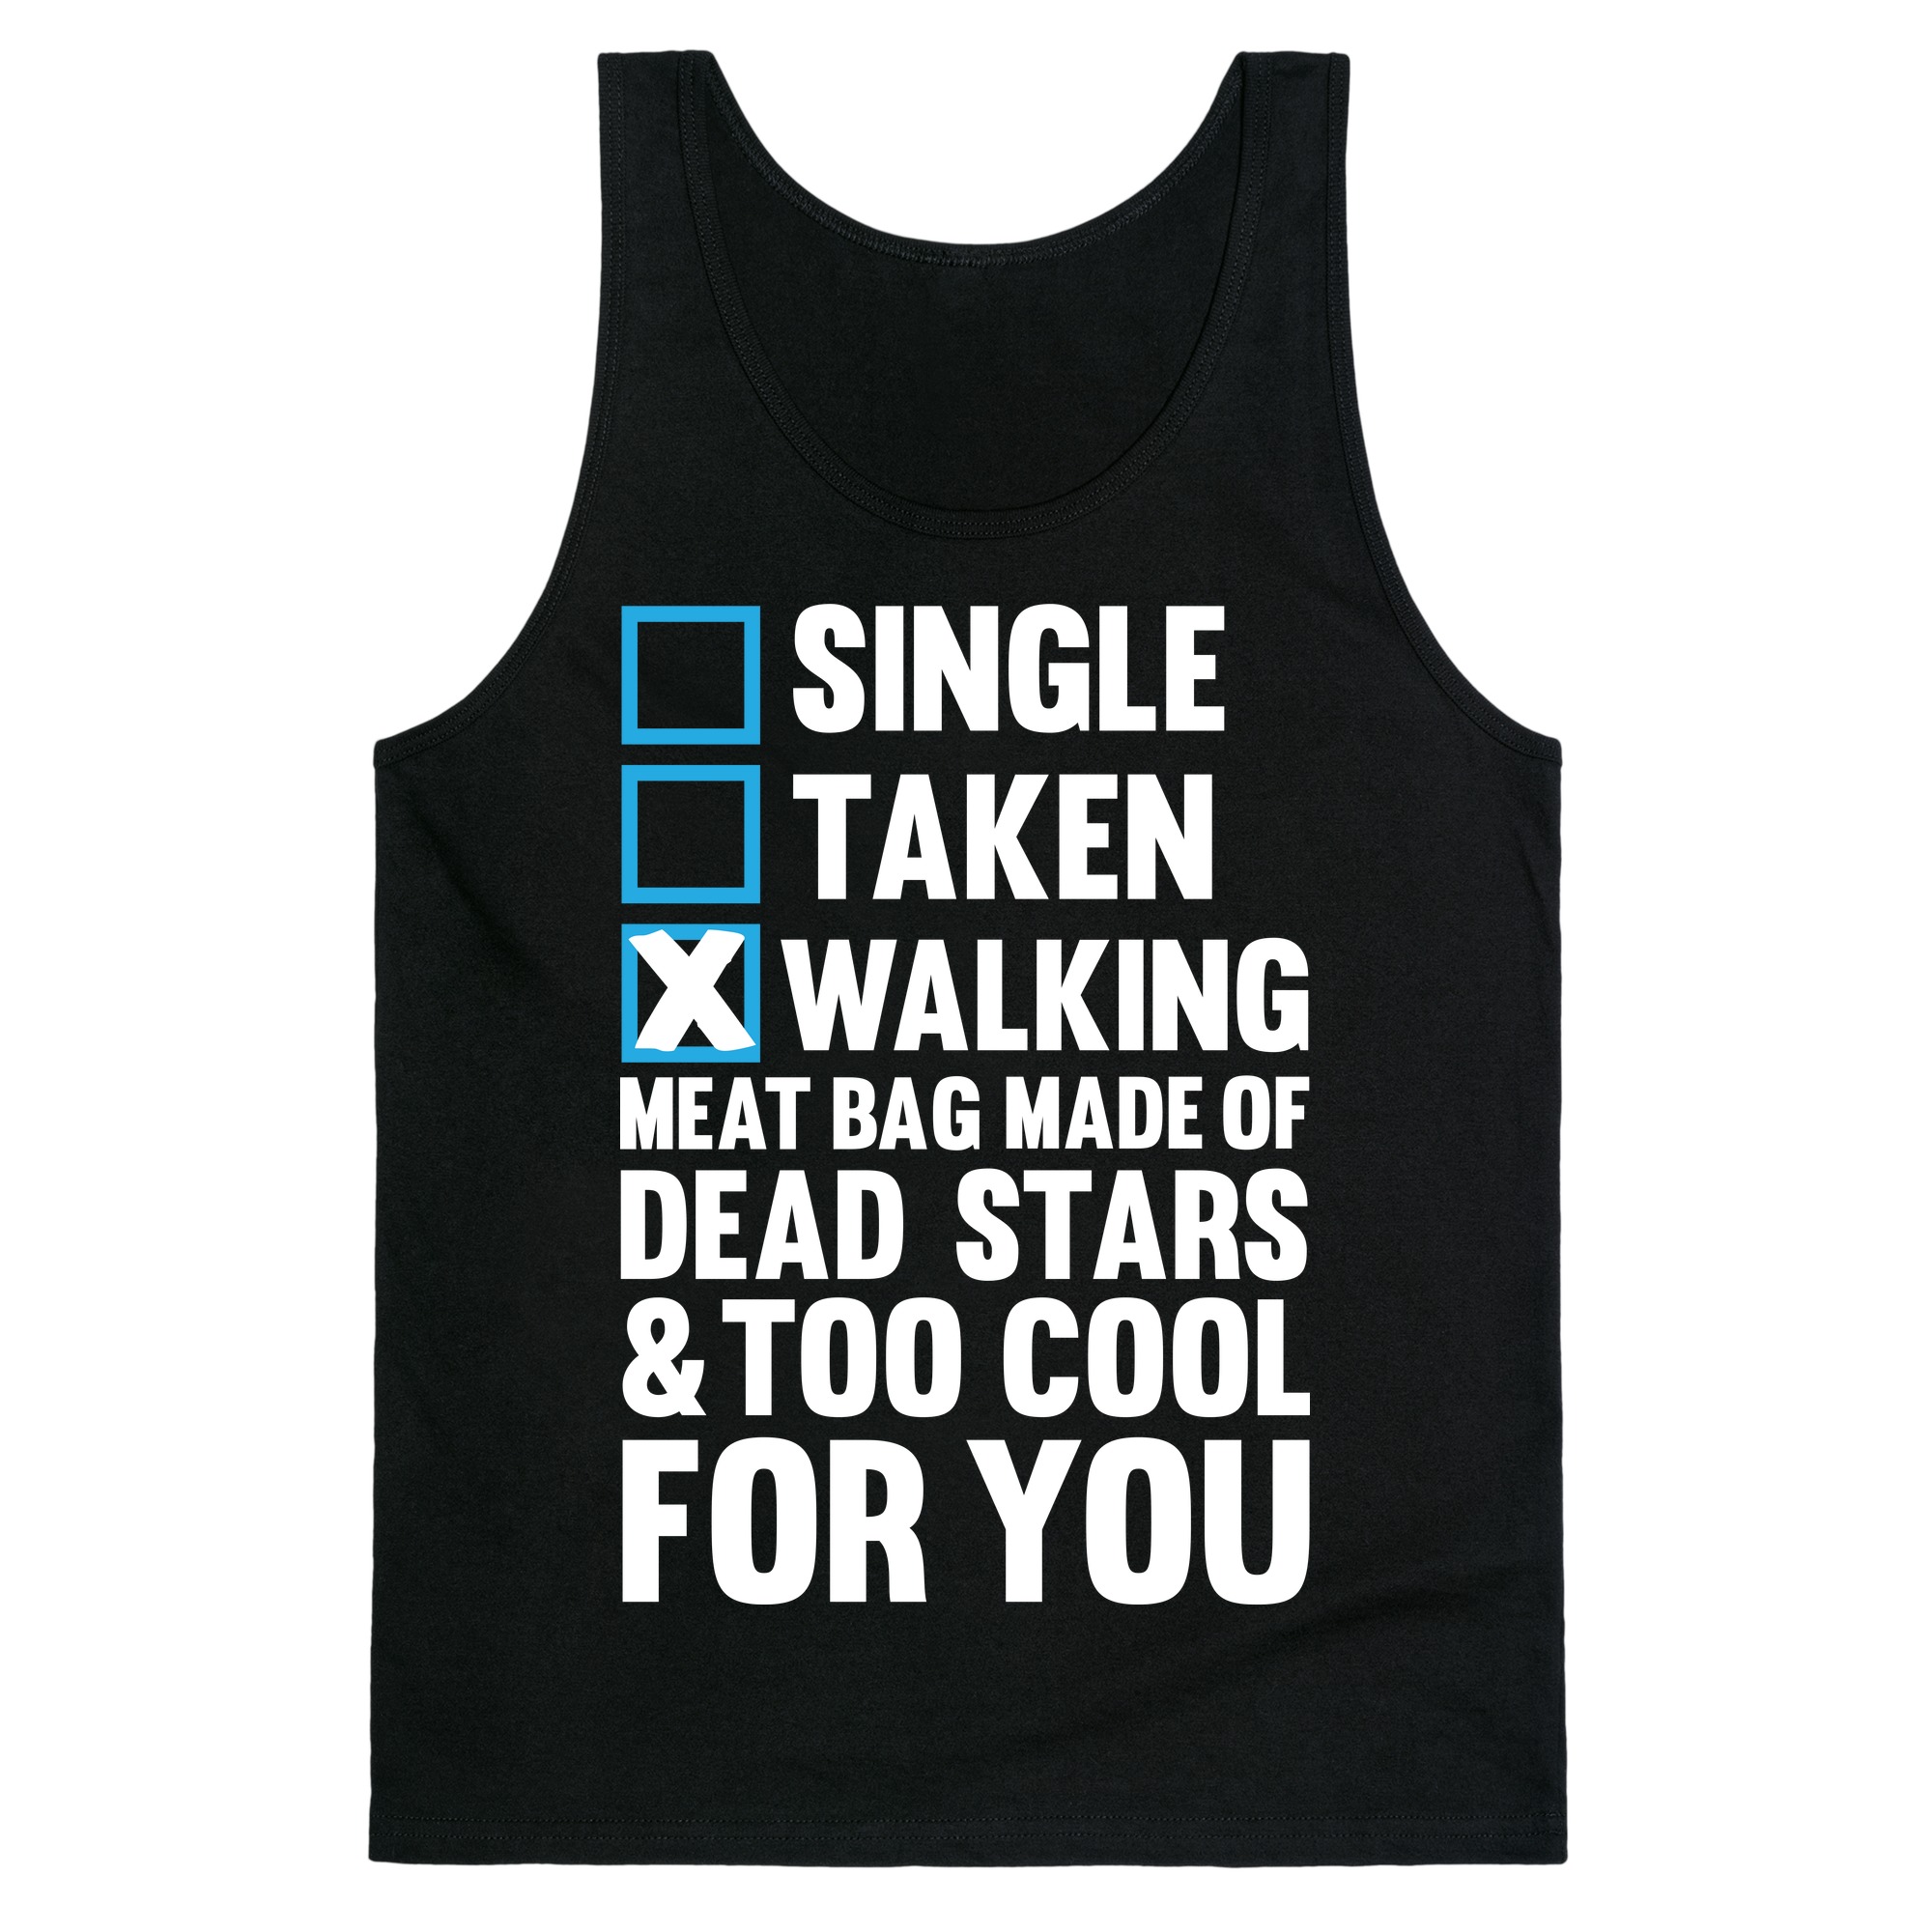 Walking Meat Bag Made Of Dead Stars Tank Tops Lookhuman